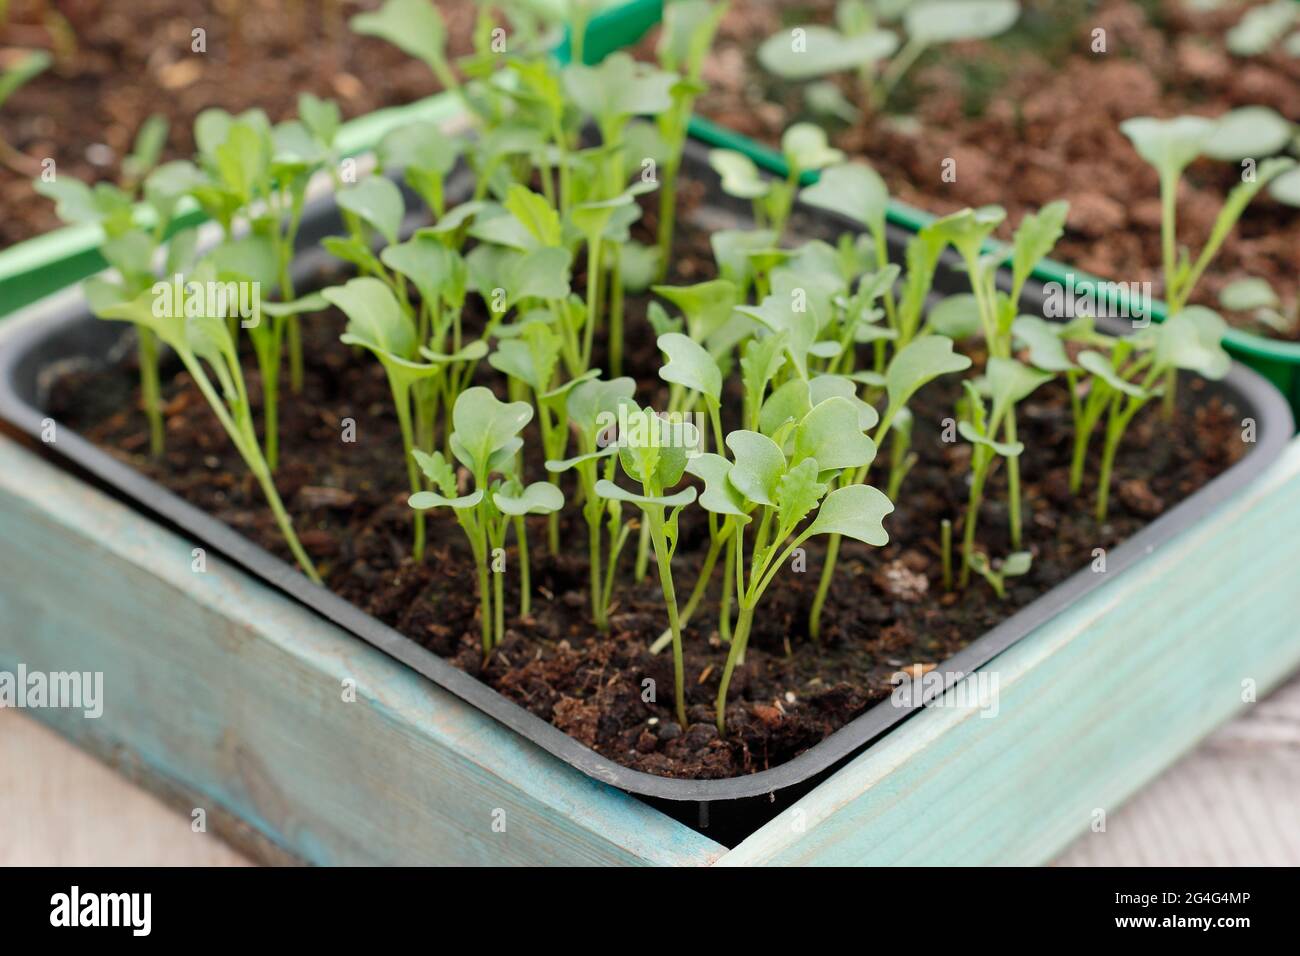 Kale seedlings in a tray. Cavolo nero (also called Nero di Toscana) seedlings grown from seed in a tray. Stock Photo